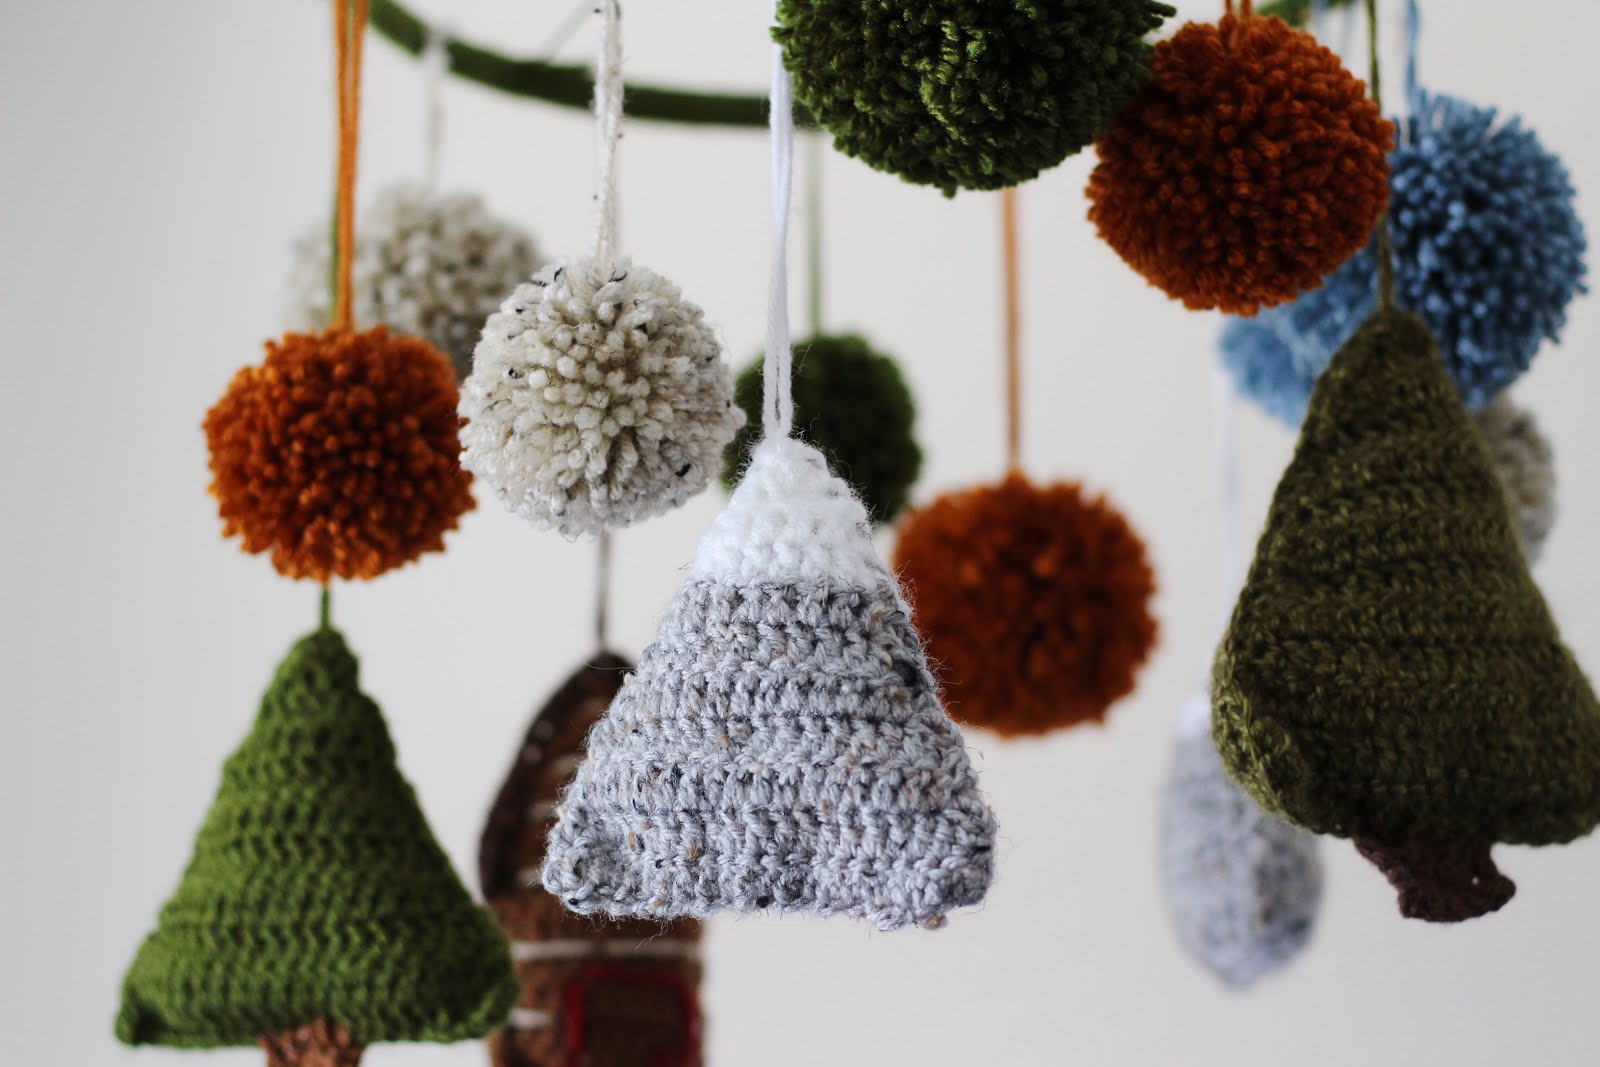 Woodland Baby Mobile - Crochet baby mobiles are colorful, fun and creative. Grab your hook and your favorite type of yarn, and get started on a baby mobile for someone you know. #CrochetBabyMobiles #CrochetPatterns #FreeCrochetPatterns